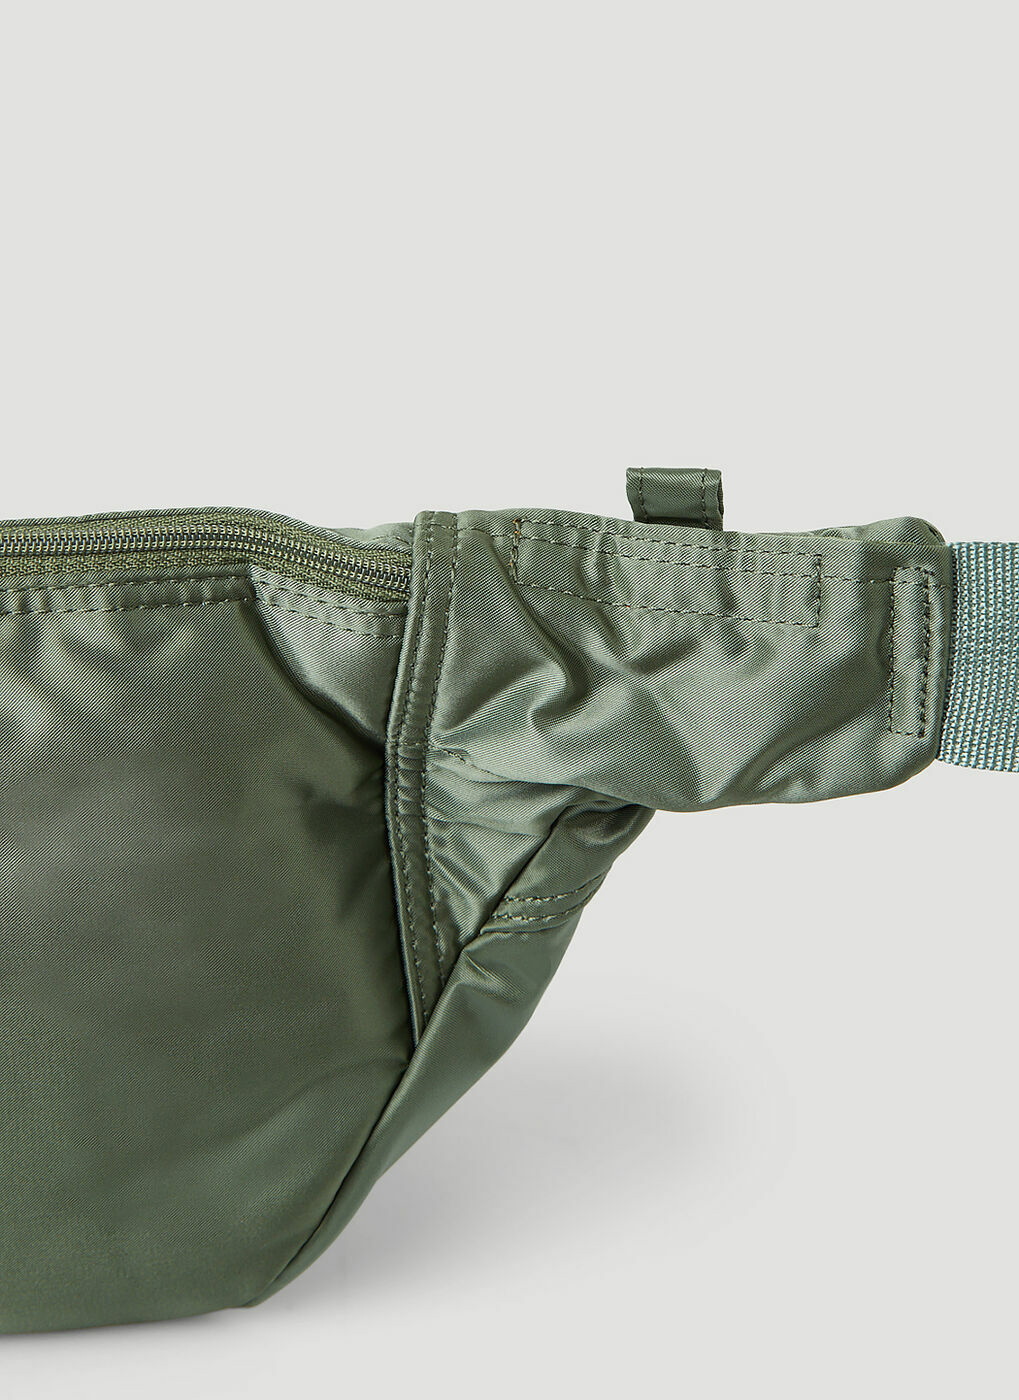 Sage Technical Waist Pack Small